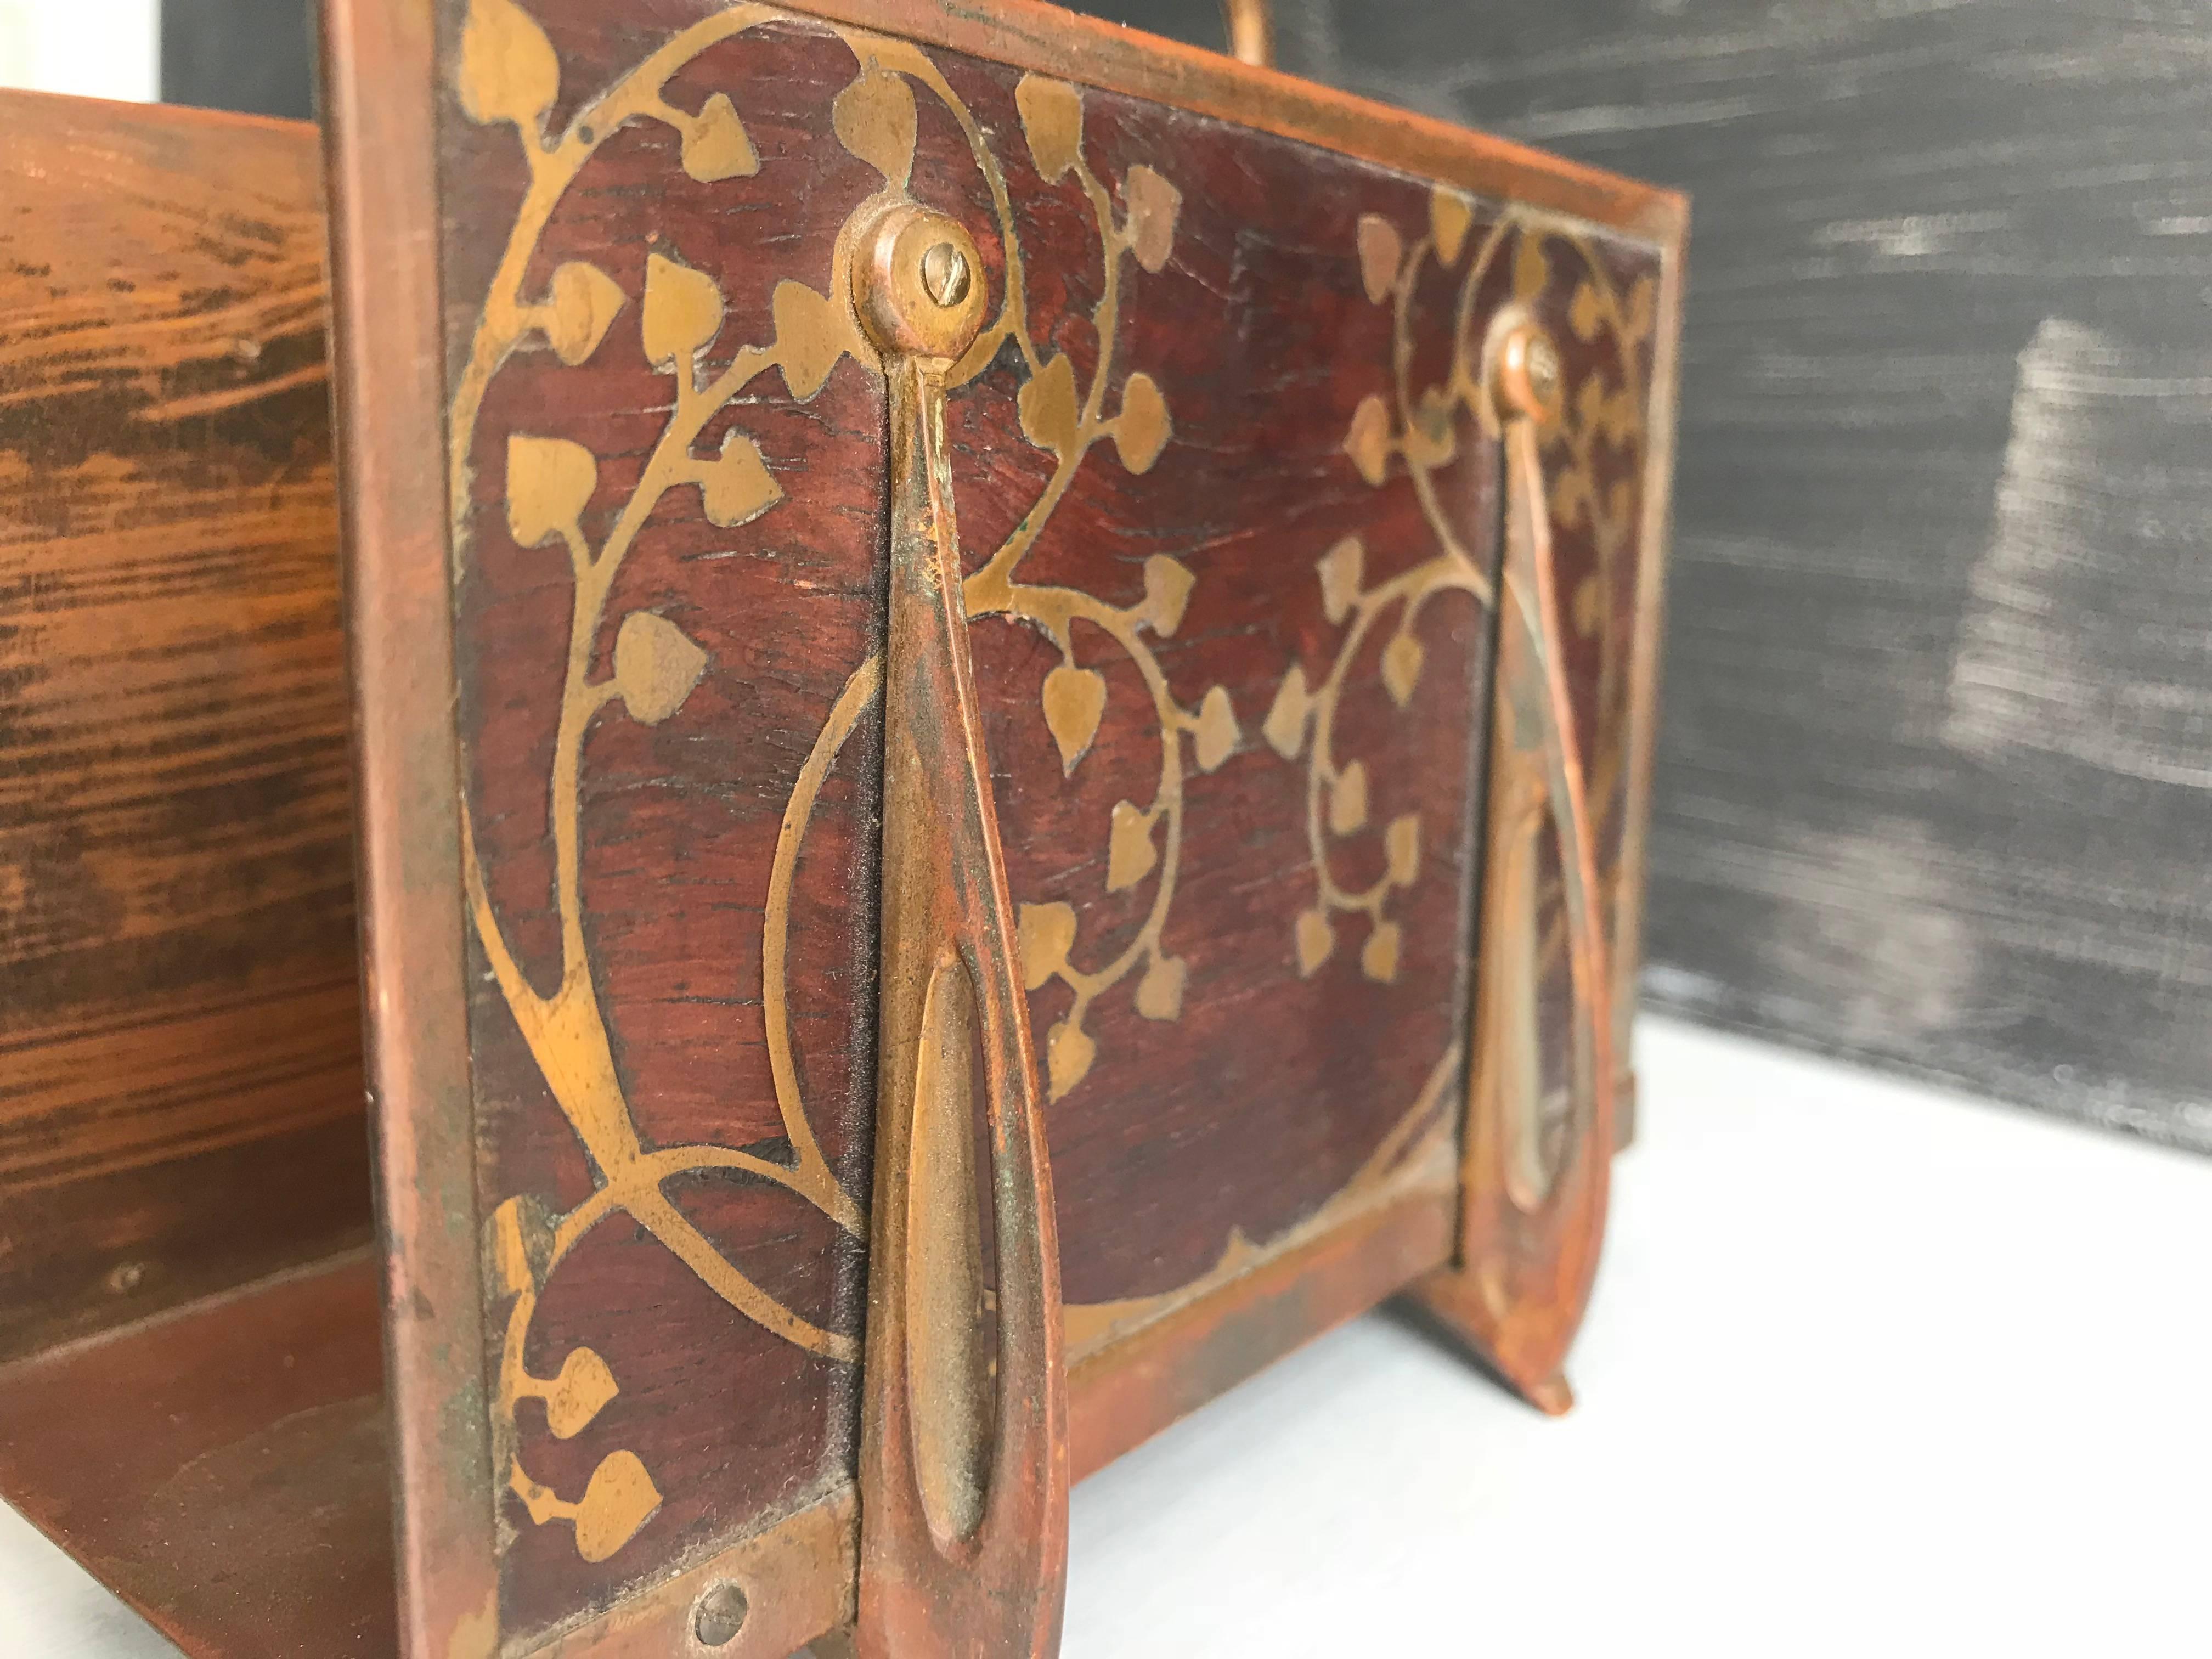 Stunning and rare Secessionist stand for envelopes and more.

There are -for good reasons- collectors of the Viennese Secessionist Style in almost every country on this globe. The finesse of the workmanship, the quality of the materials and the